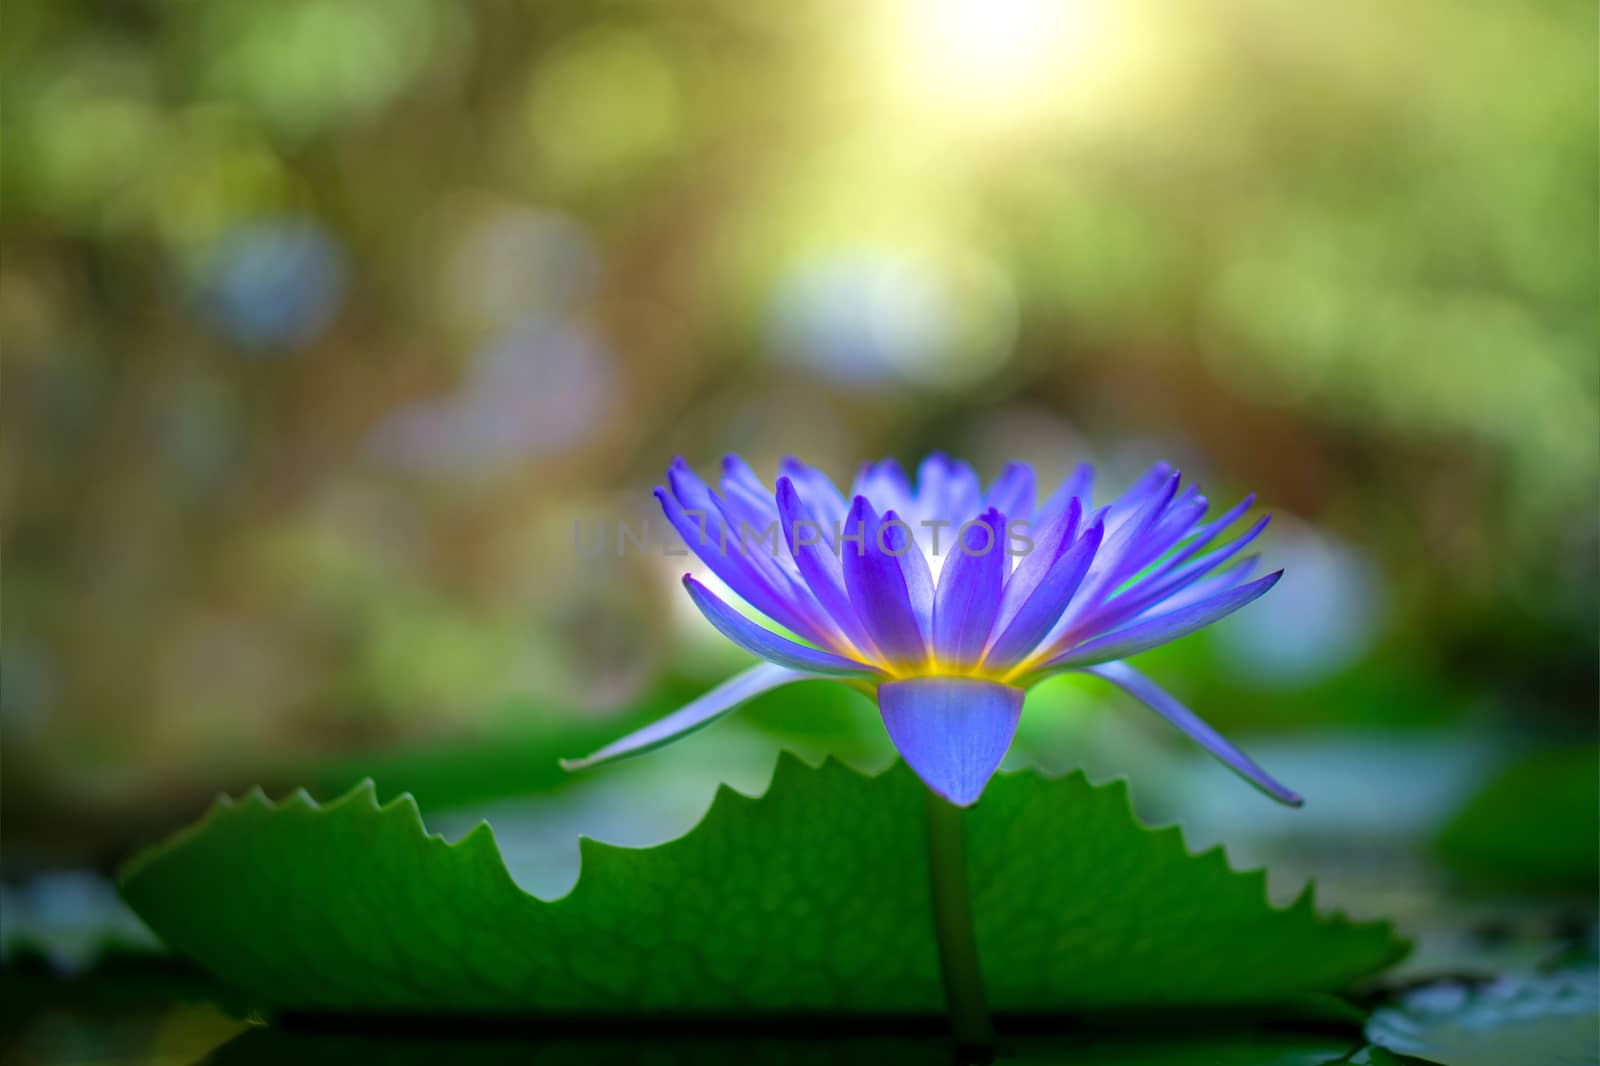 Violet thai water lily or lotus flower by pkproject